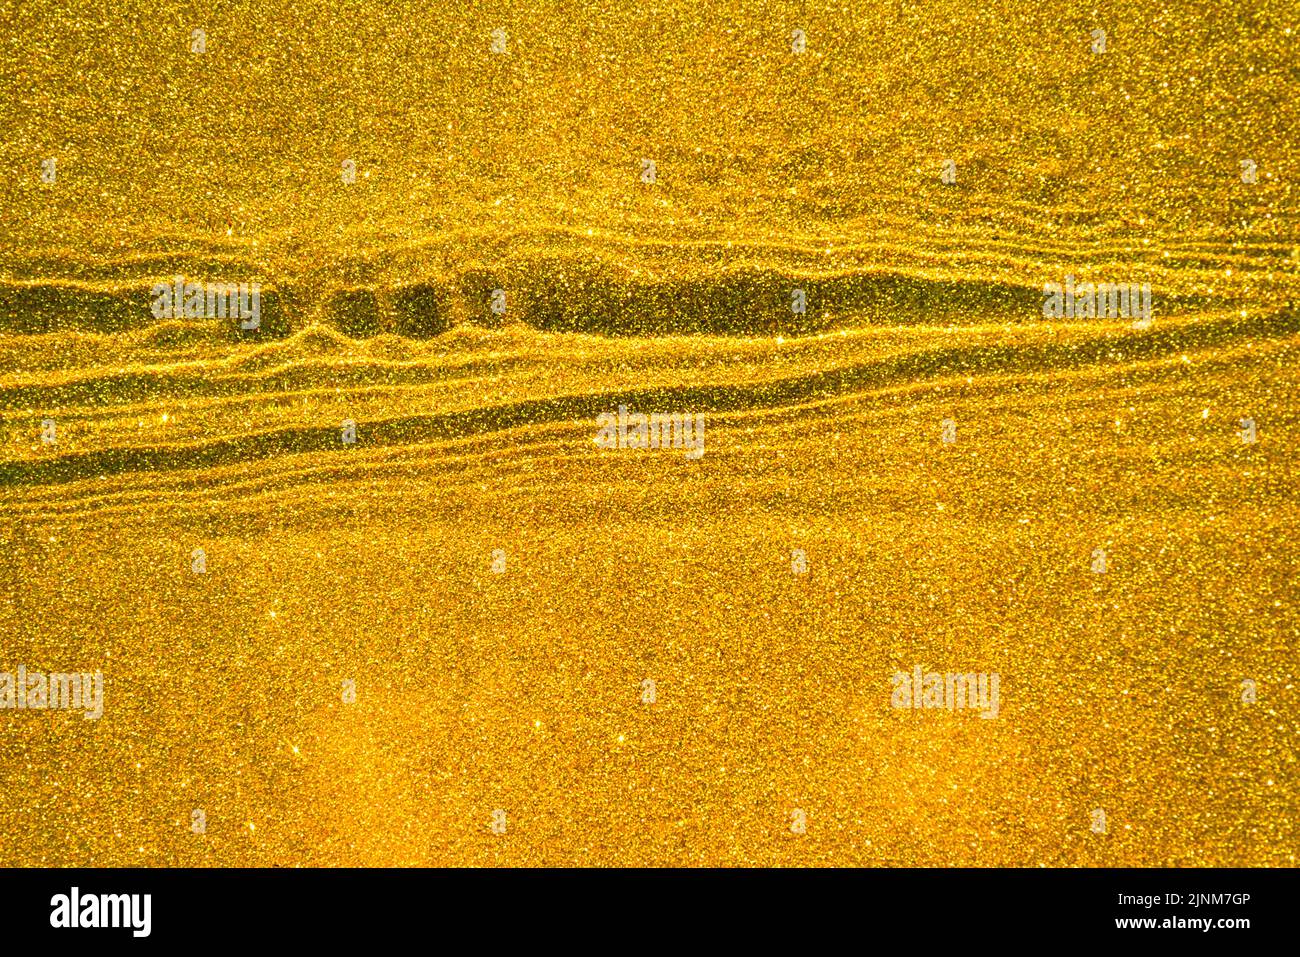 Abstract yellow background with golden sand texture underwater, with waves and ripples Stock Photo